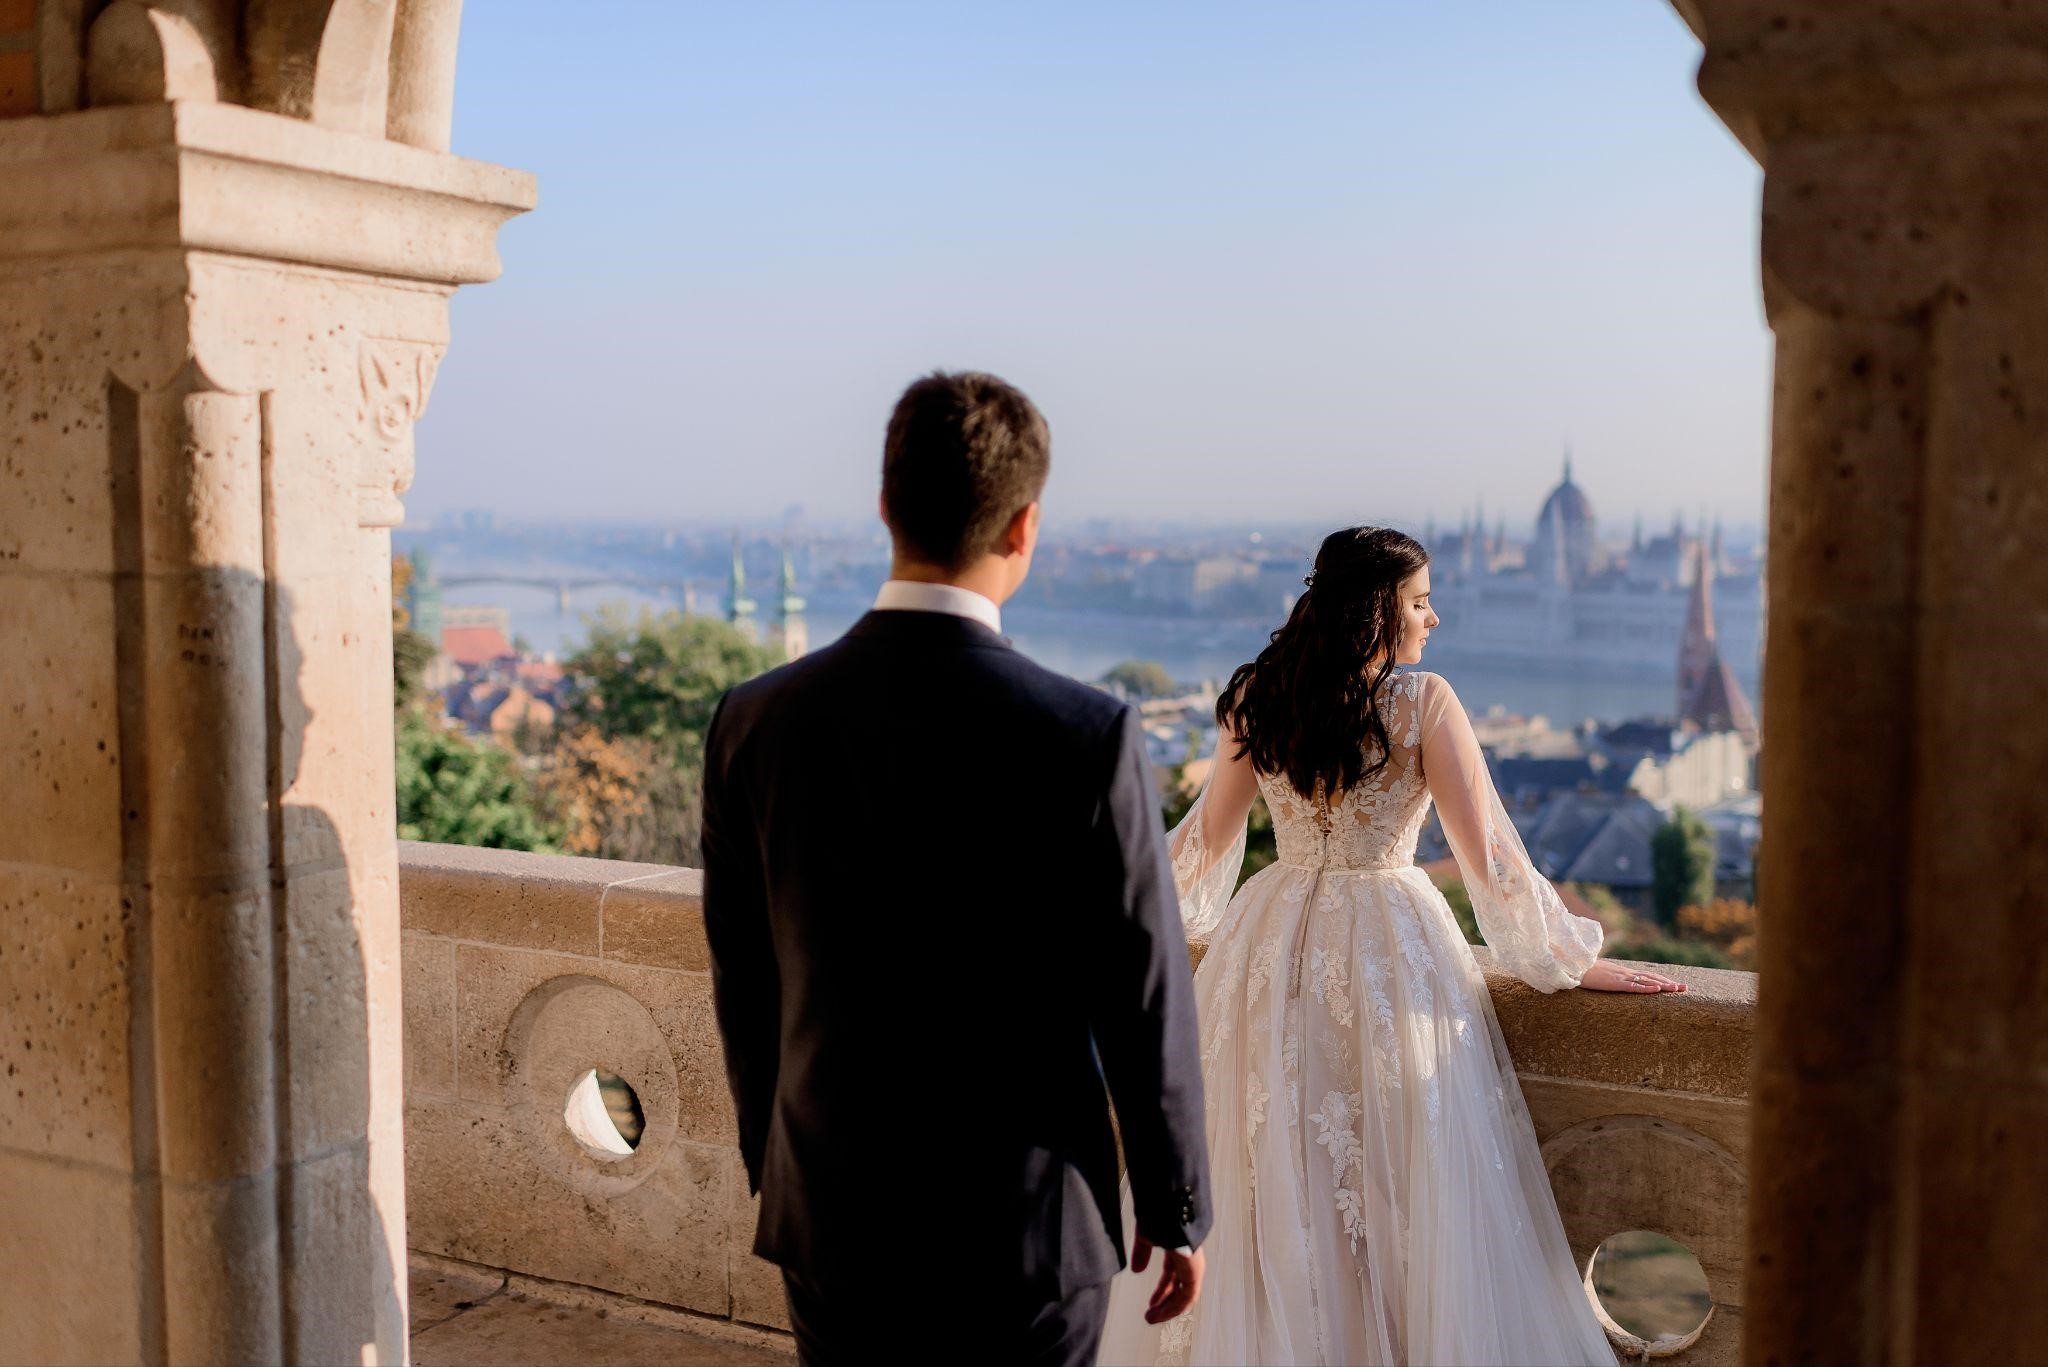 Spain, a Dream Destination for Your “I Do”: Discover the Charms of a Wedding in Spain